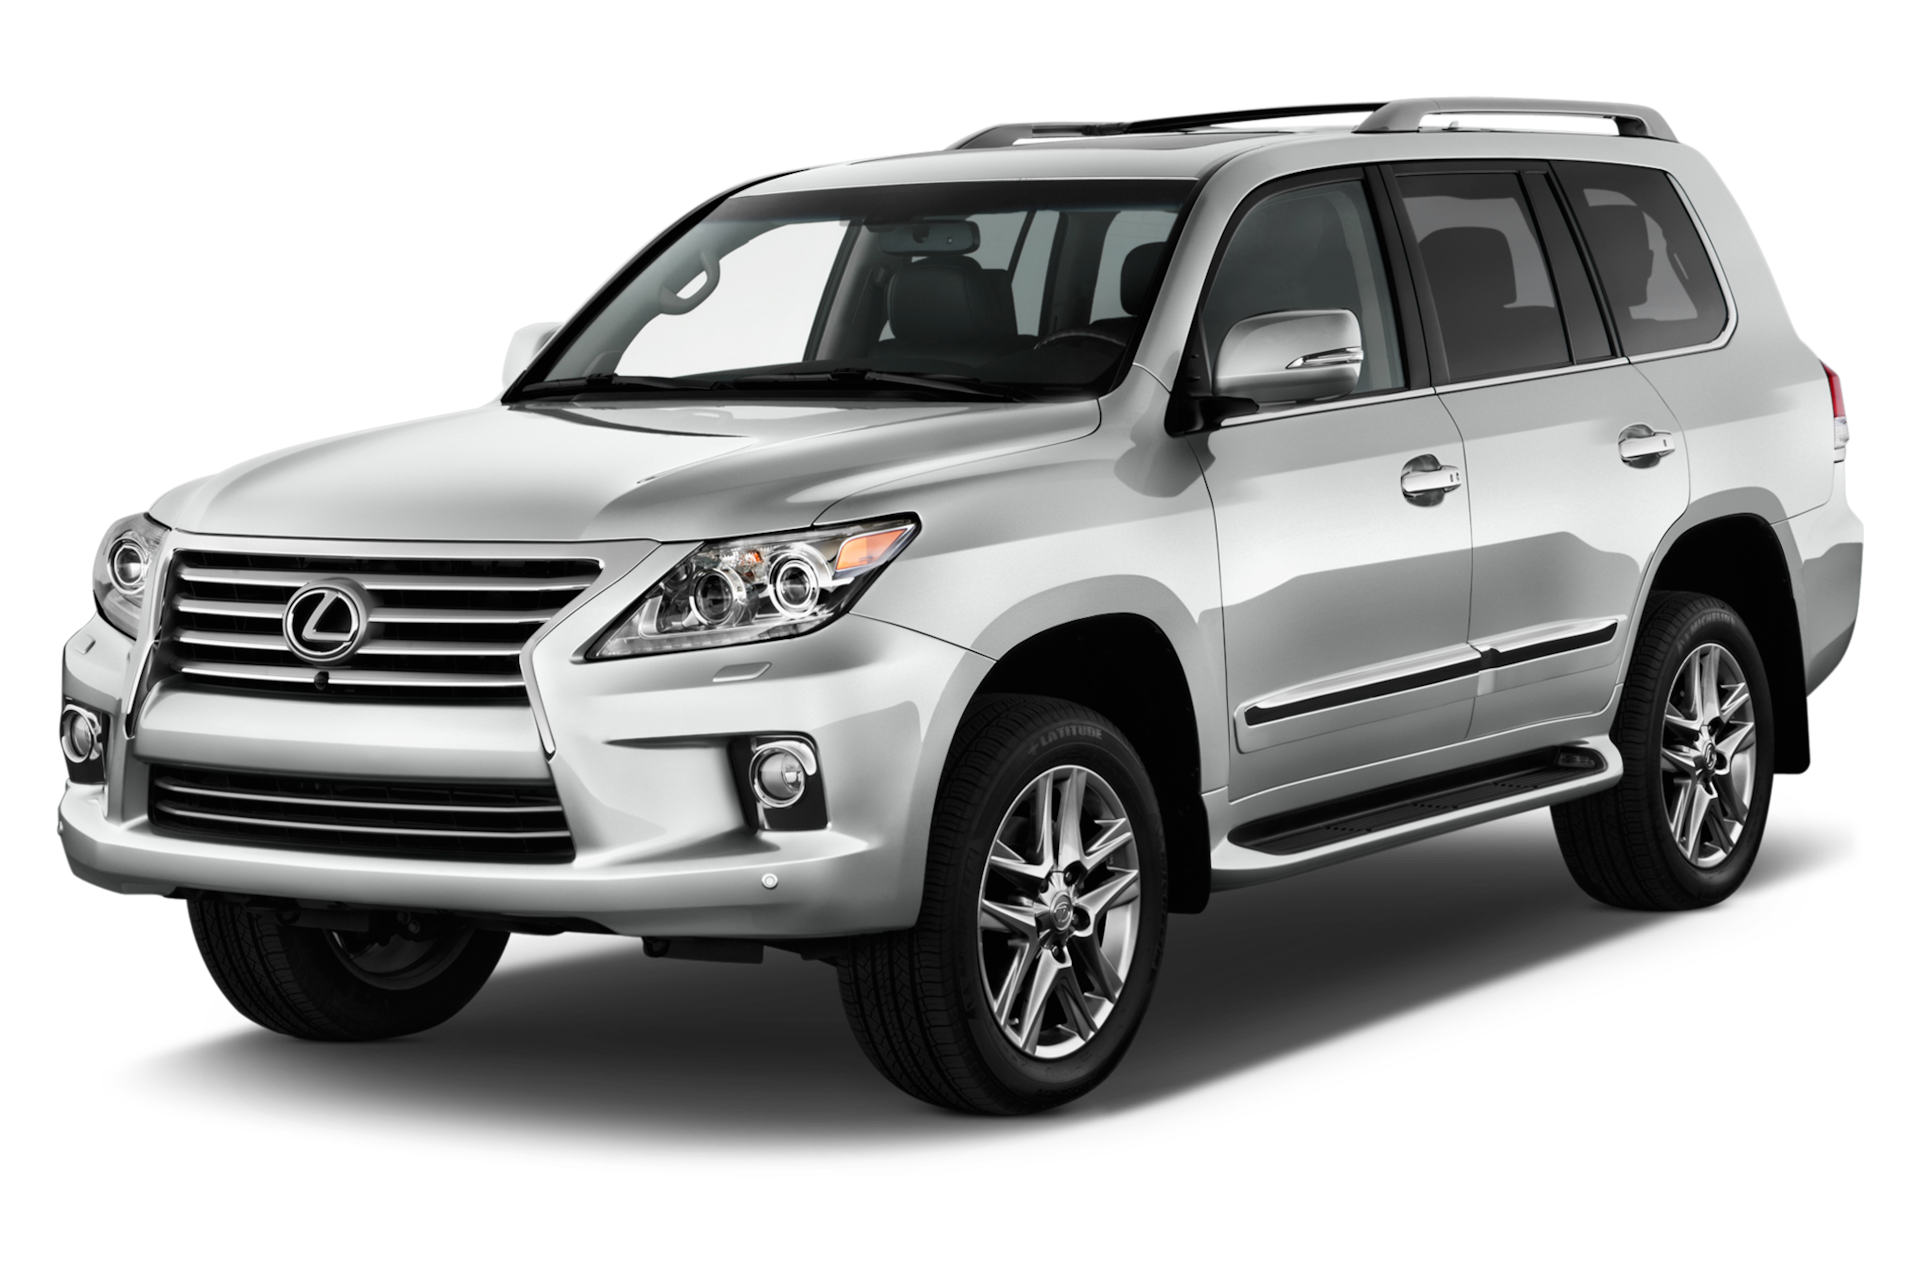 2015 Lexus LX570 Prices, Reviews, and Photos - MotorTrend